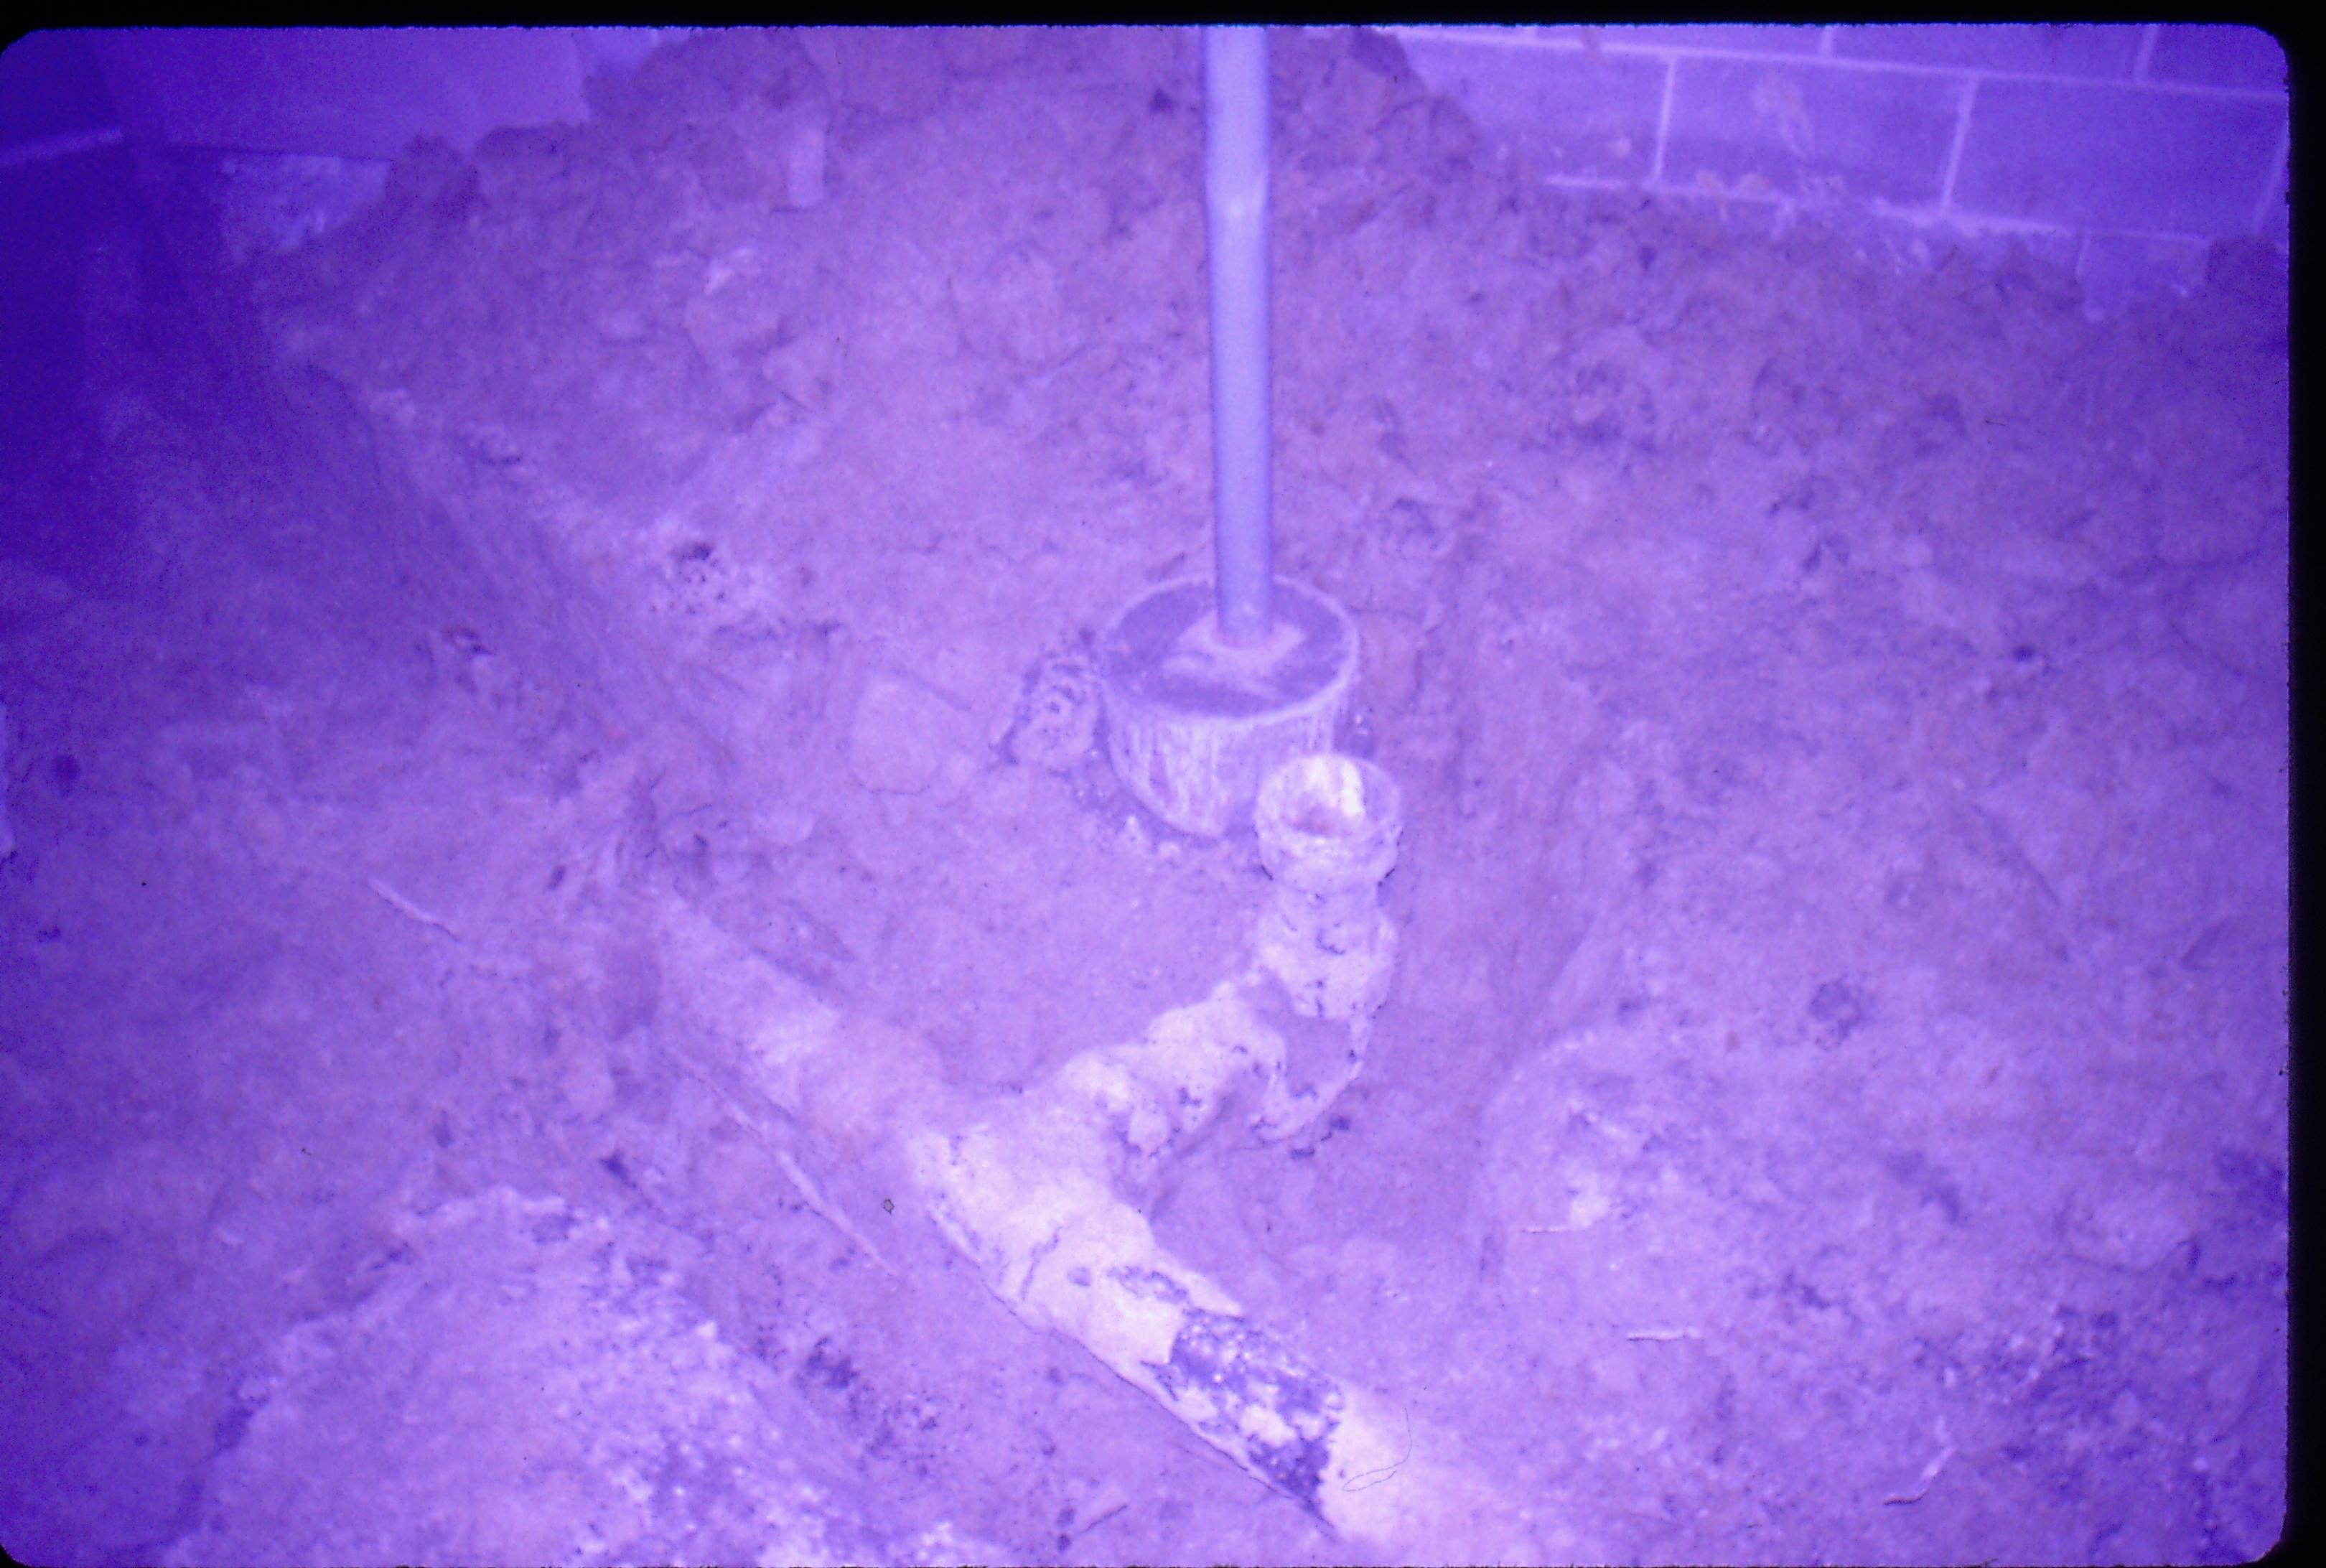 Lyon House - basement, footings and pipes in furnace room under removed floor. Cinder block wall visible in background Looking North in furnace room in basement Lyon, Basement, pipes, plumbing, cinder block, footings